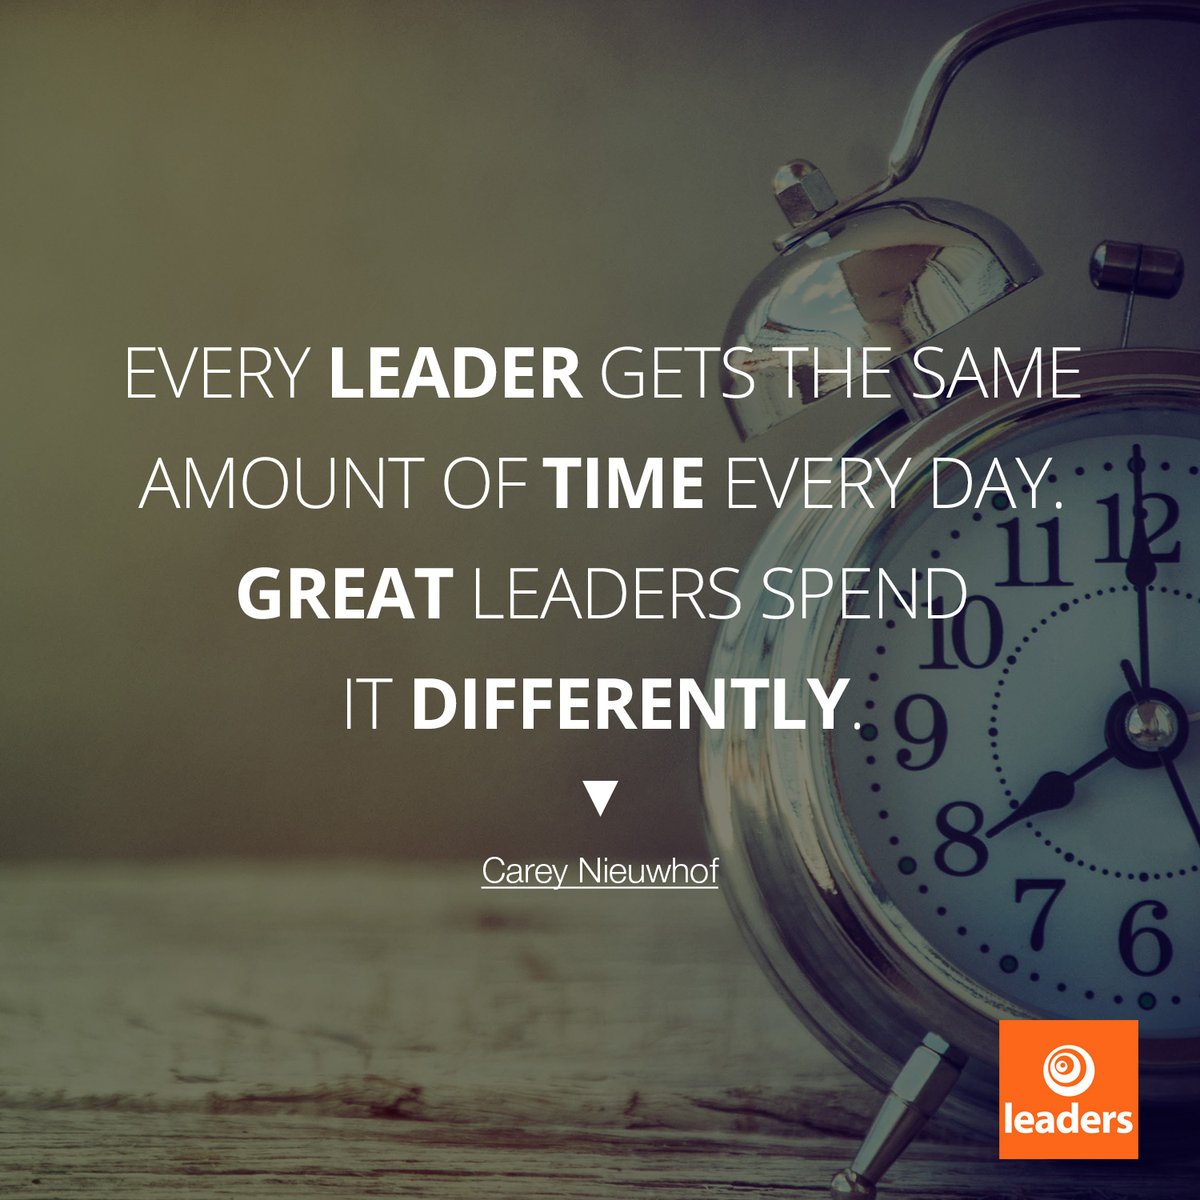 Live Blog From Orange One Day 9 Leadership Quotes And Lessons From Jon Acuff Brian Dodd On Leadership